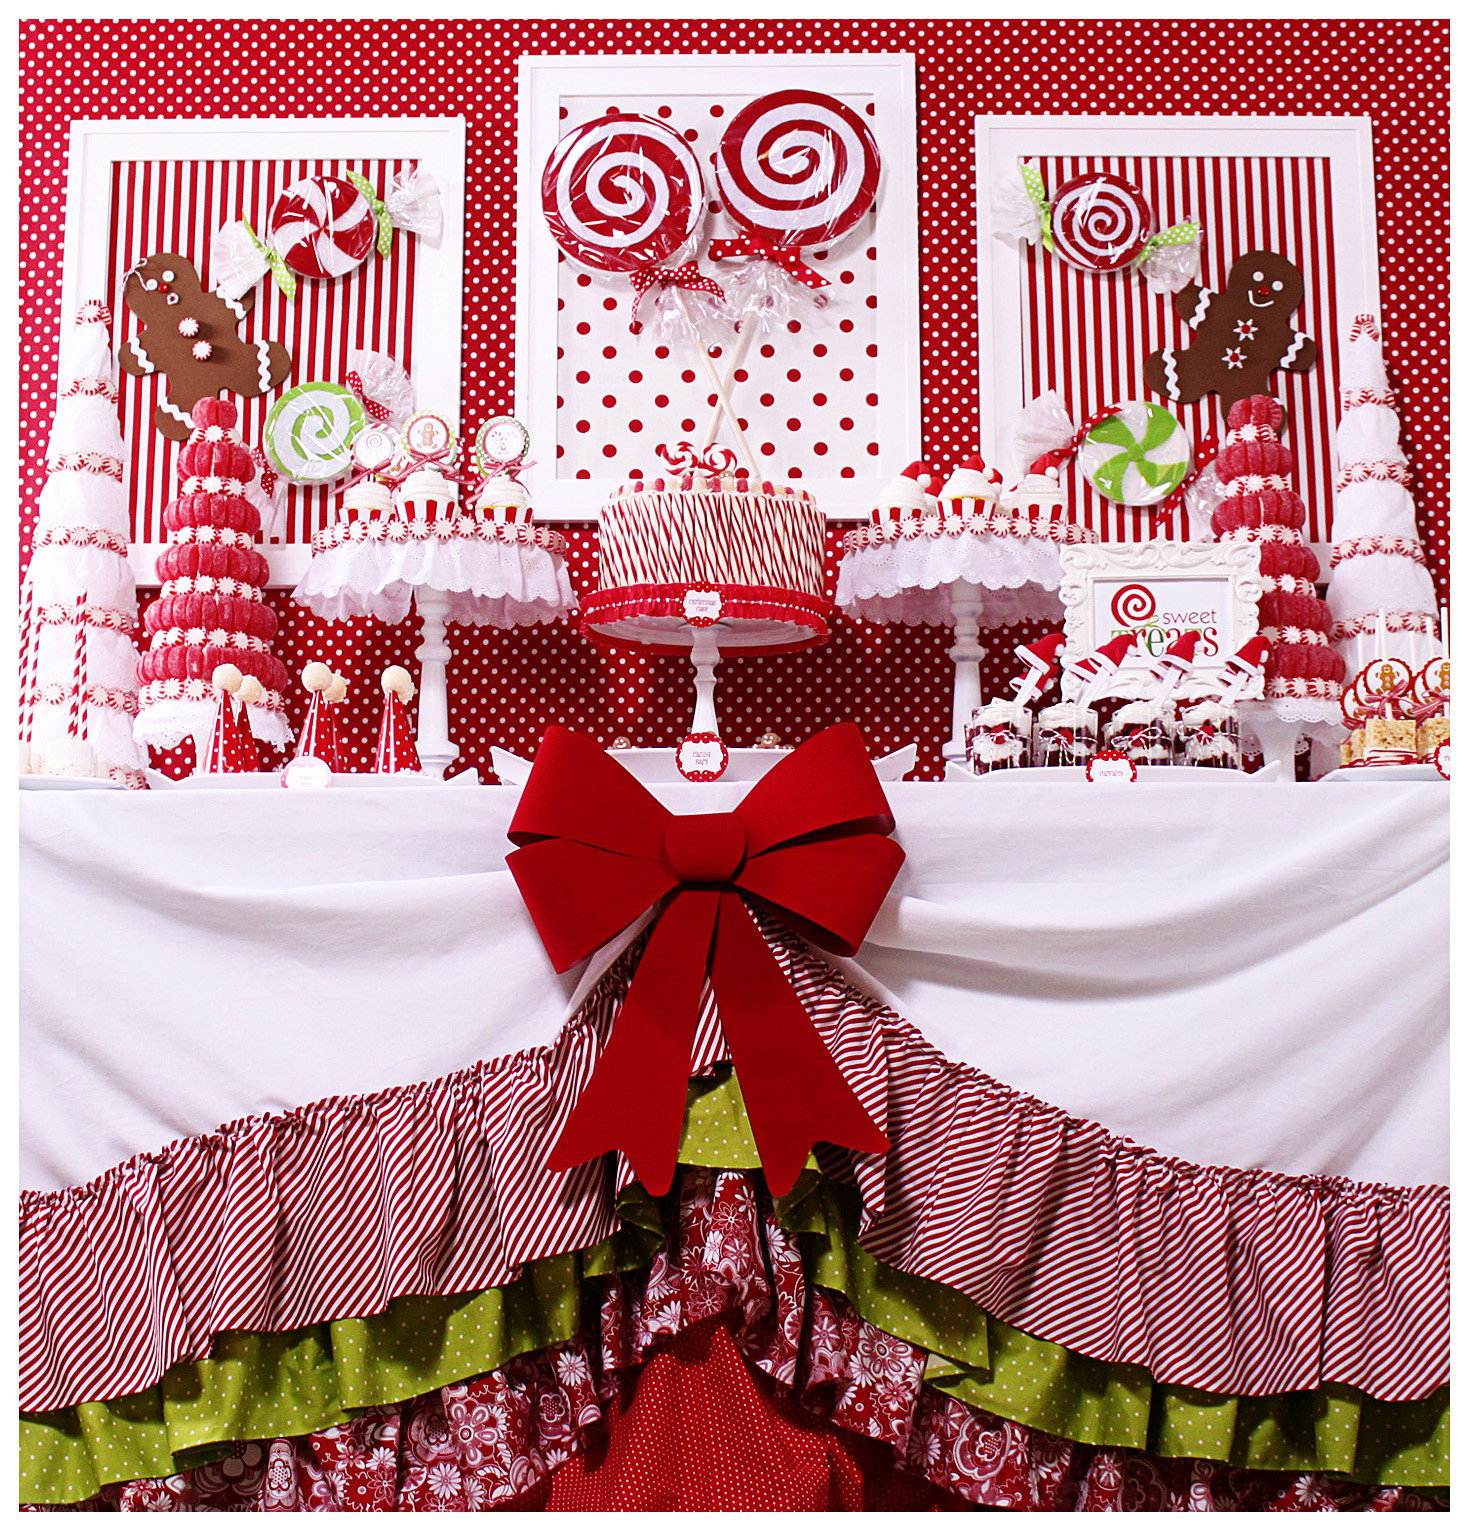 Candy Themed Christmas
 Amanda s Parties To Go Candy Christmas Dessert Table